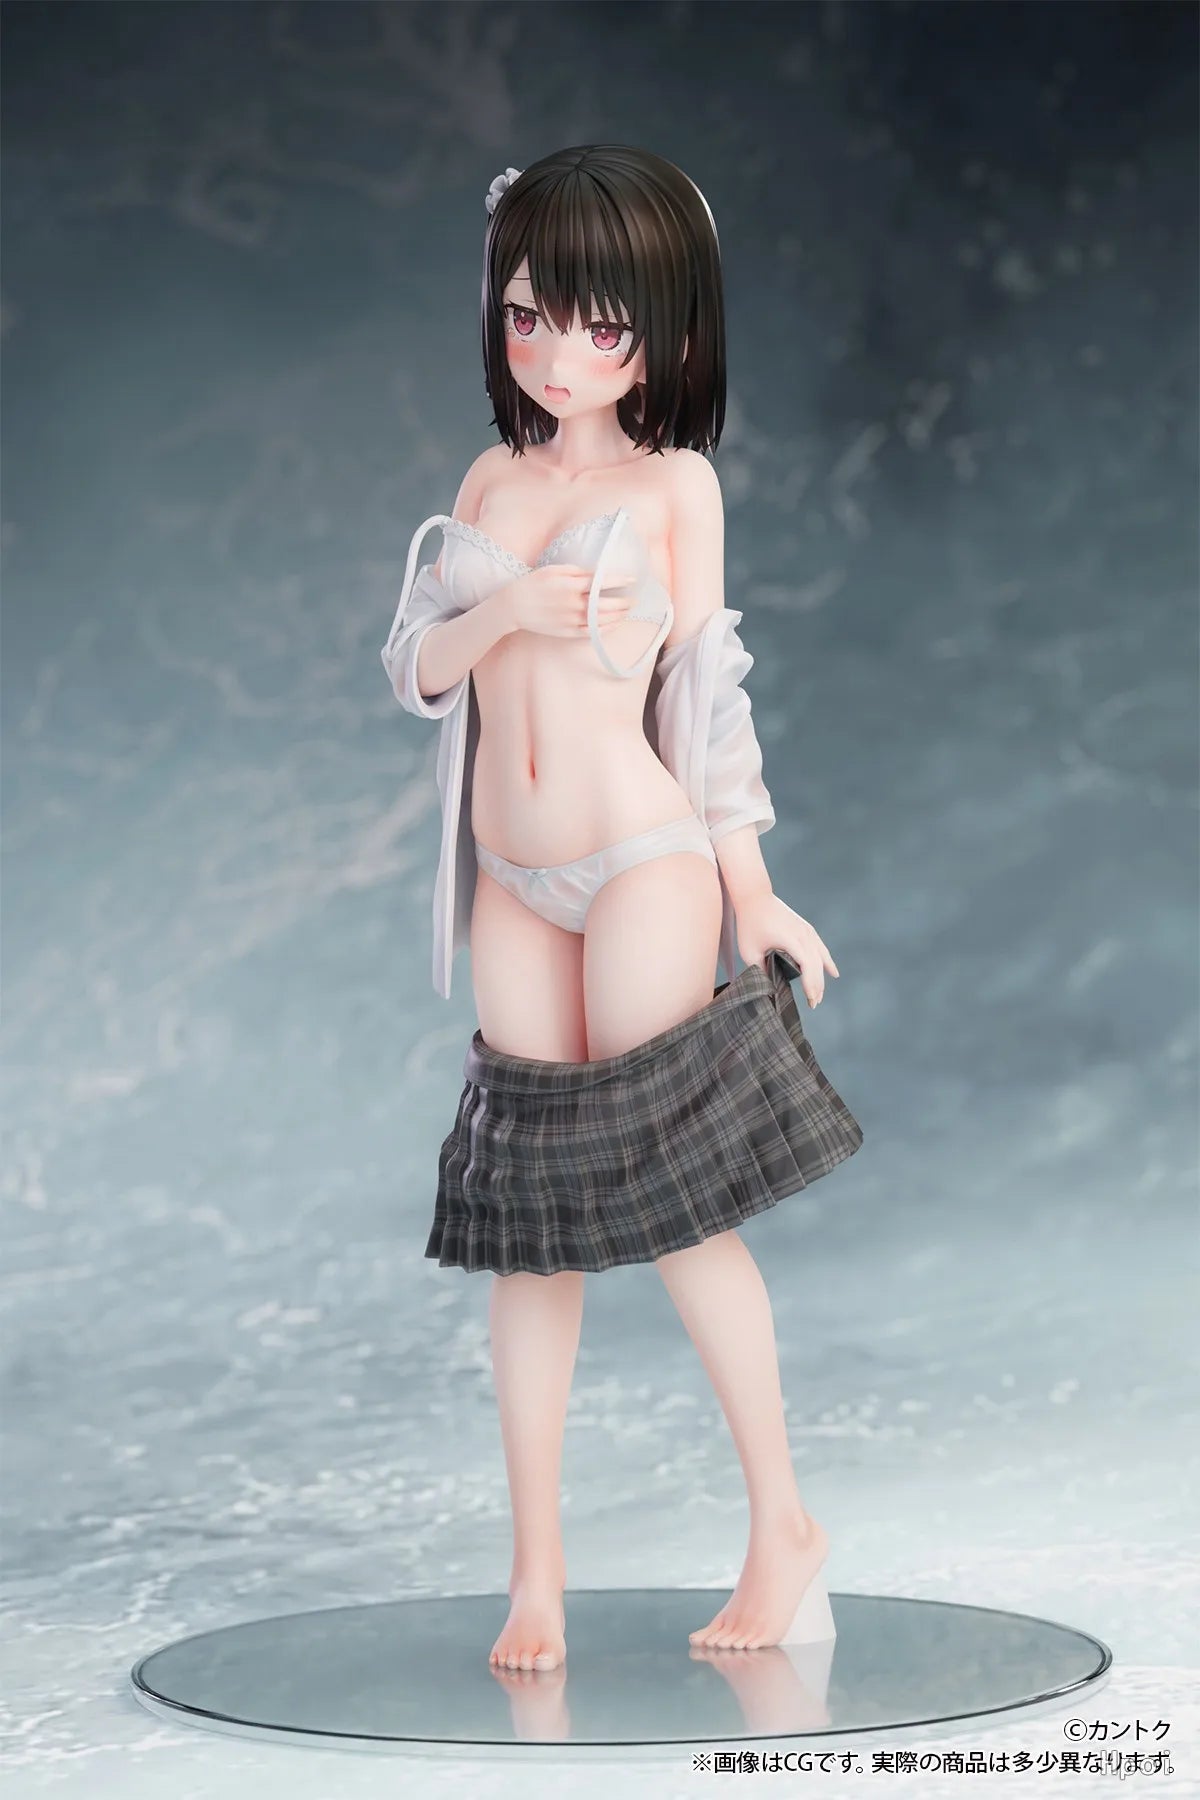 1/7 NSFW B full More Check Shizuku Anime Sexy Girl Figurine PVC Action Figure Toy Adults Collection kawaii cute Model Doll gifts